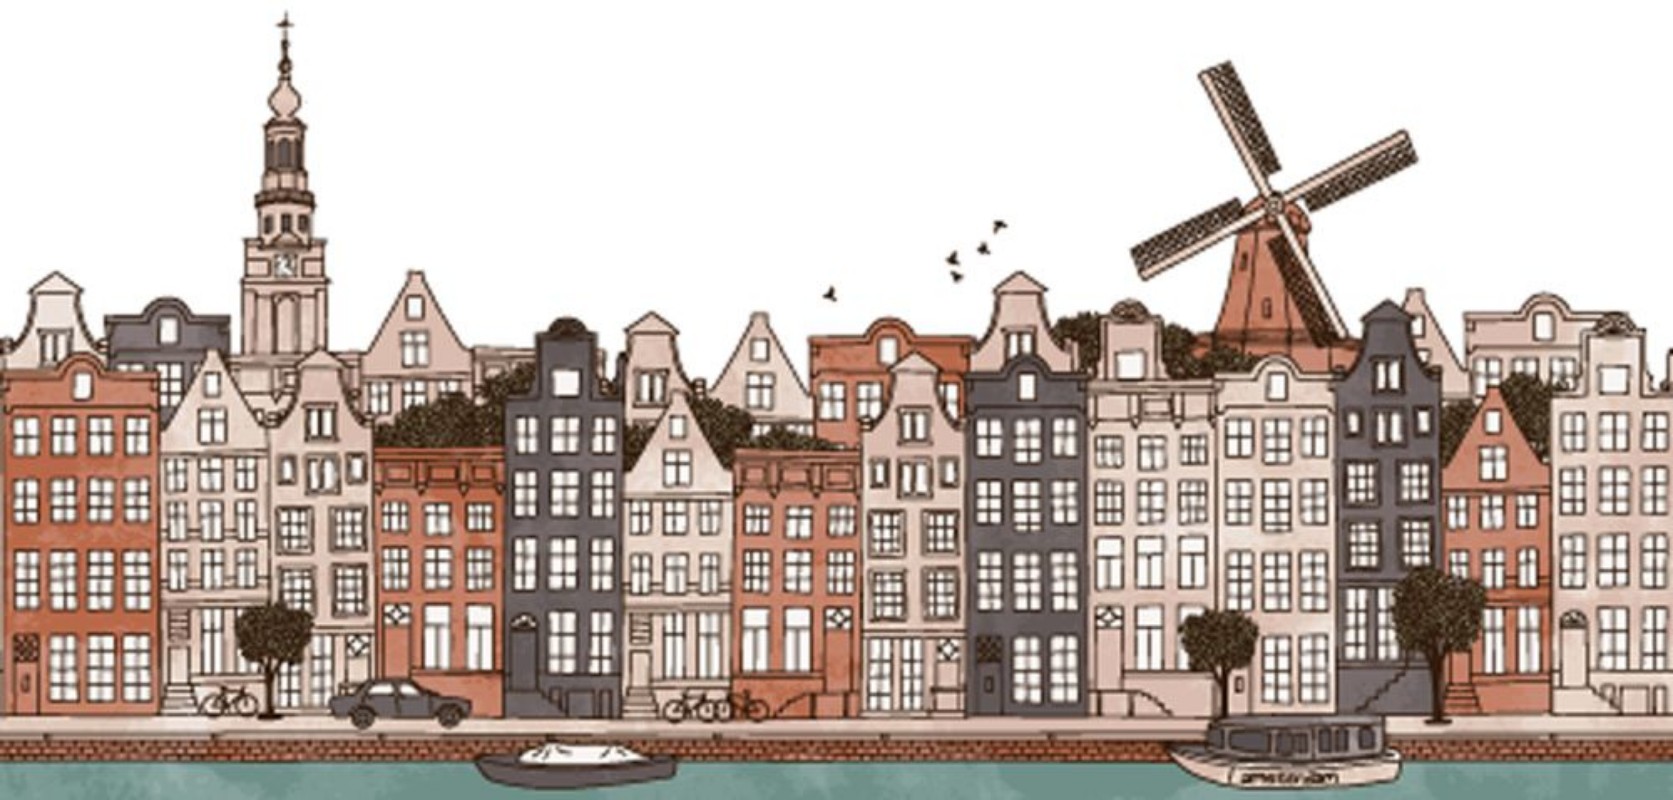 Image de Amsterdam Netherlands - seamless banner of Amsterdams skyline hand drawn and digitally colored ink illustration